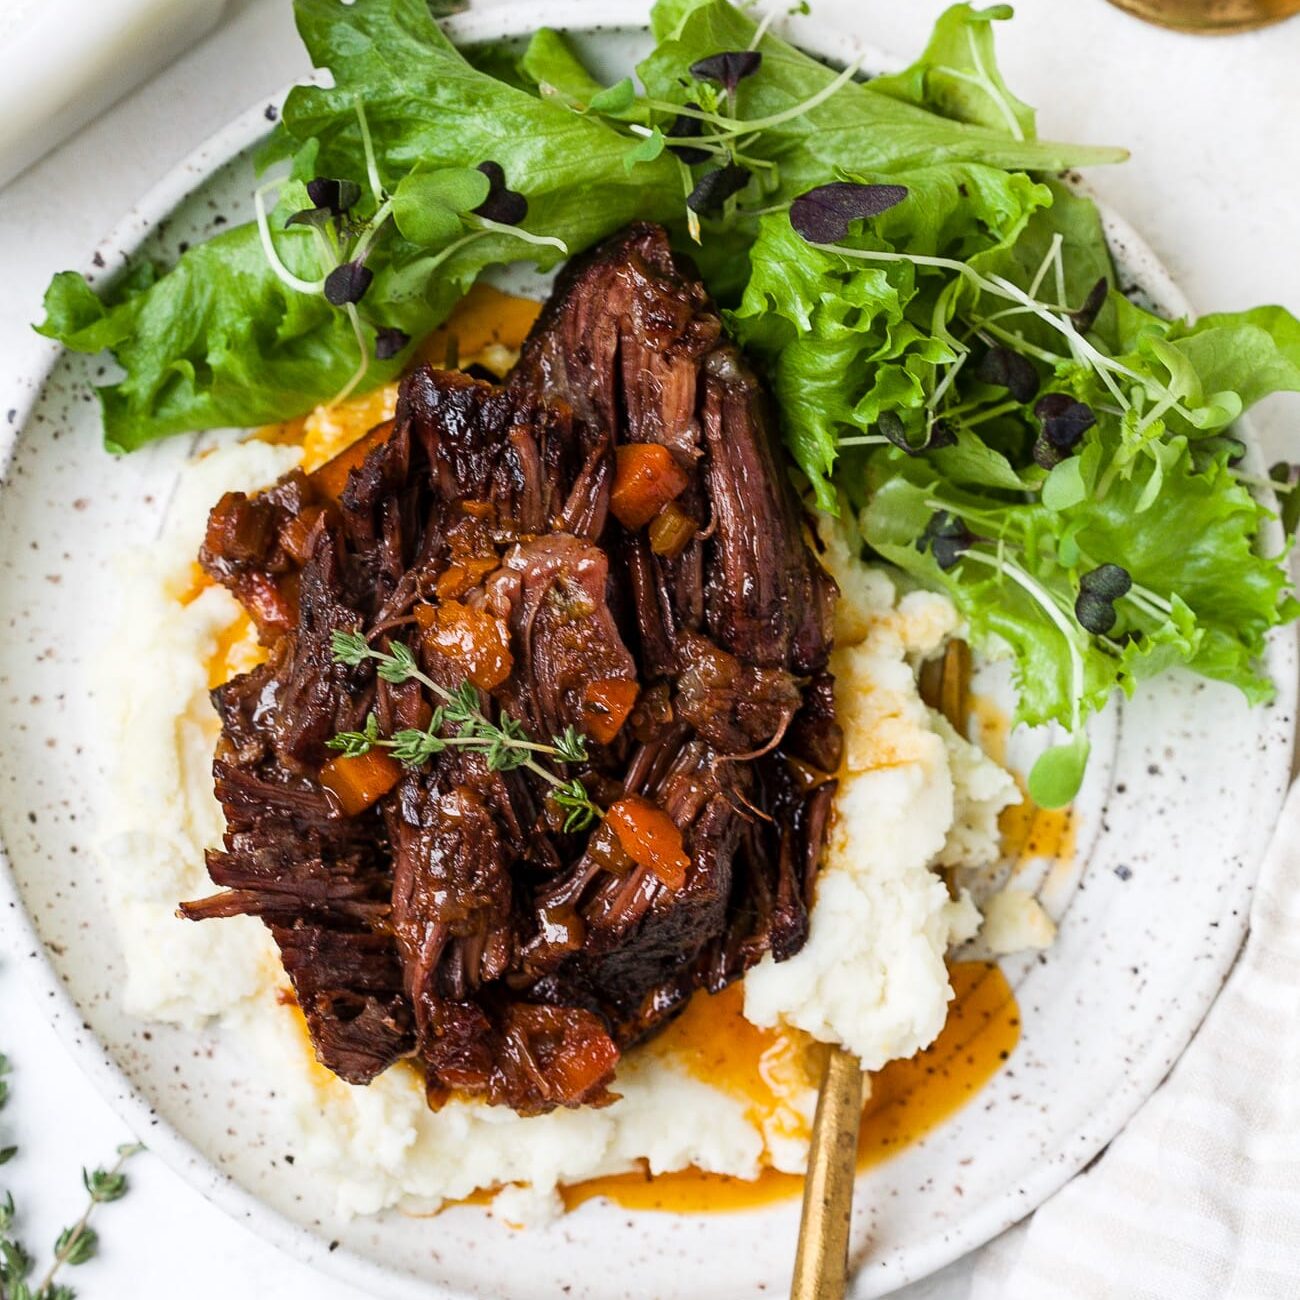 Red wine braised short ribs on a plate with mashed potatoes and a salad. One of my favorite date night dinner ideas.